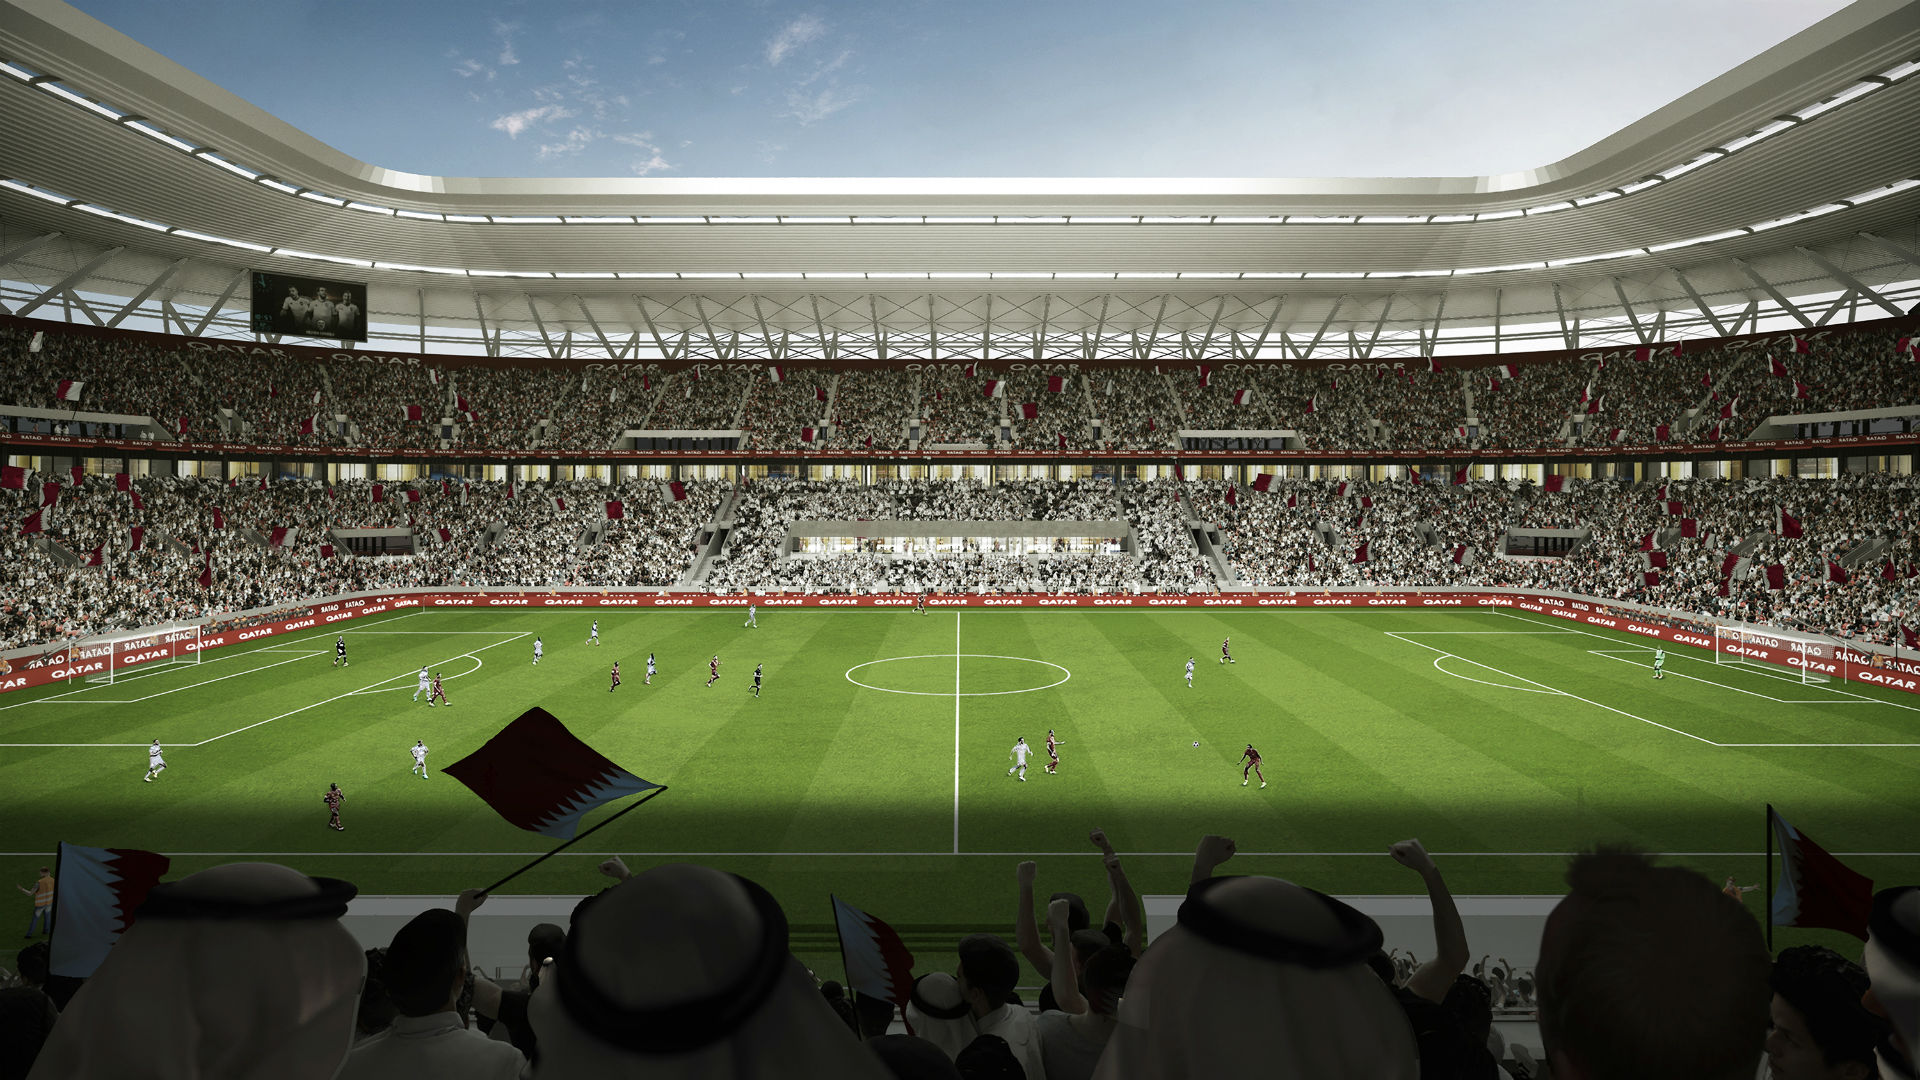 2022 World Cup: Plans revealed for incredible ground-breaking stadium